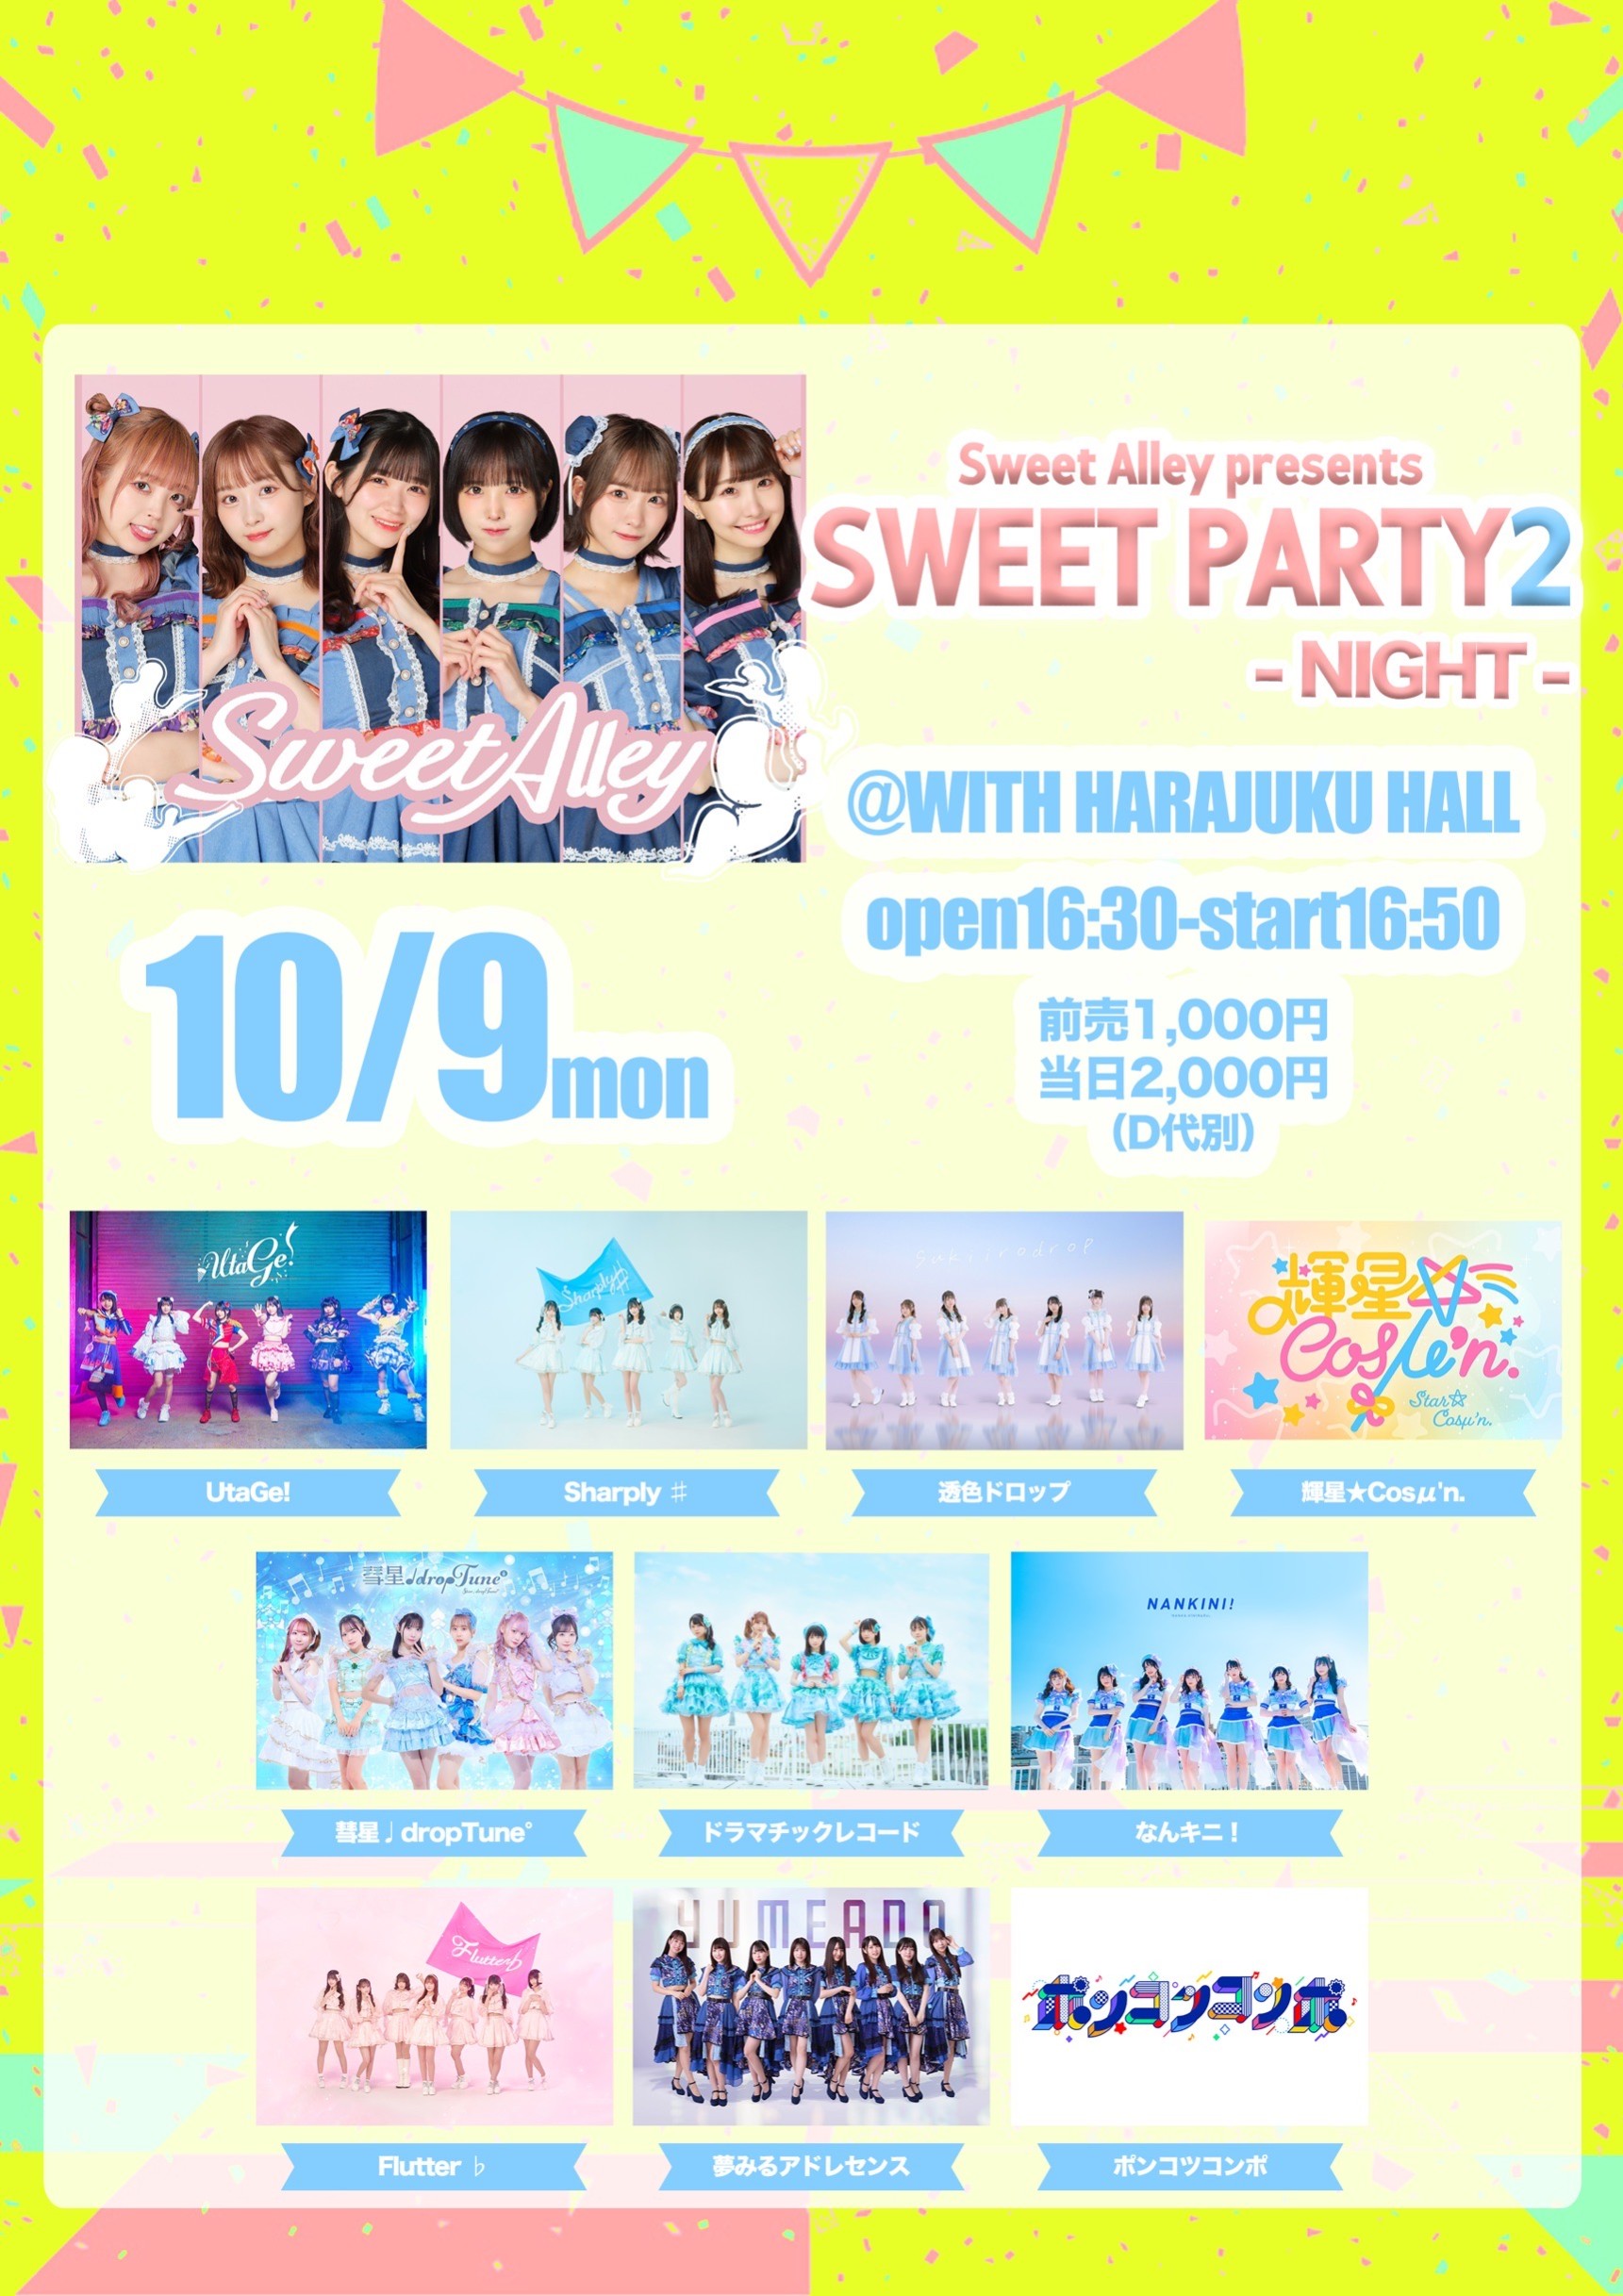 SWEET PARTY２-NIGHT-